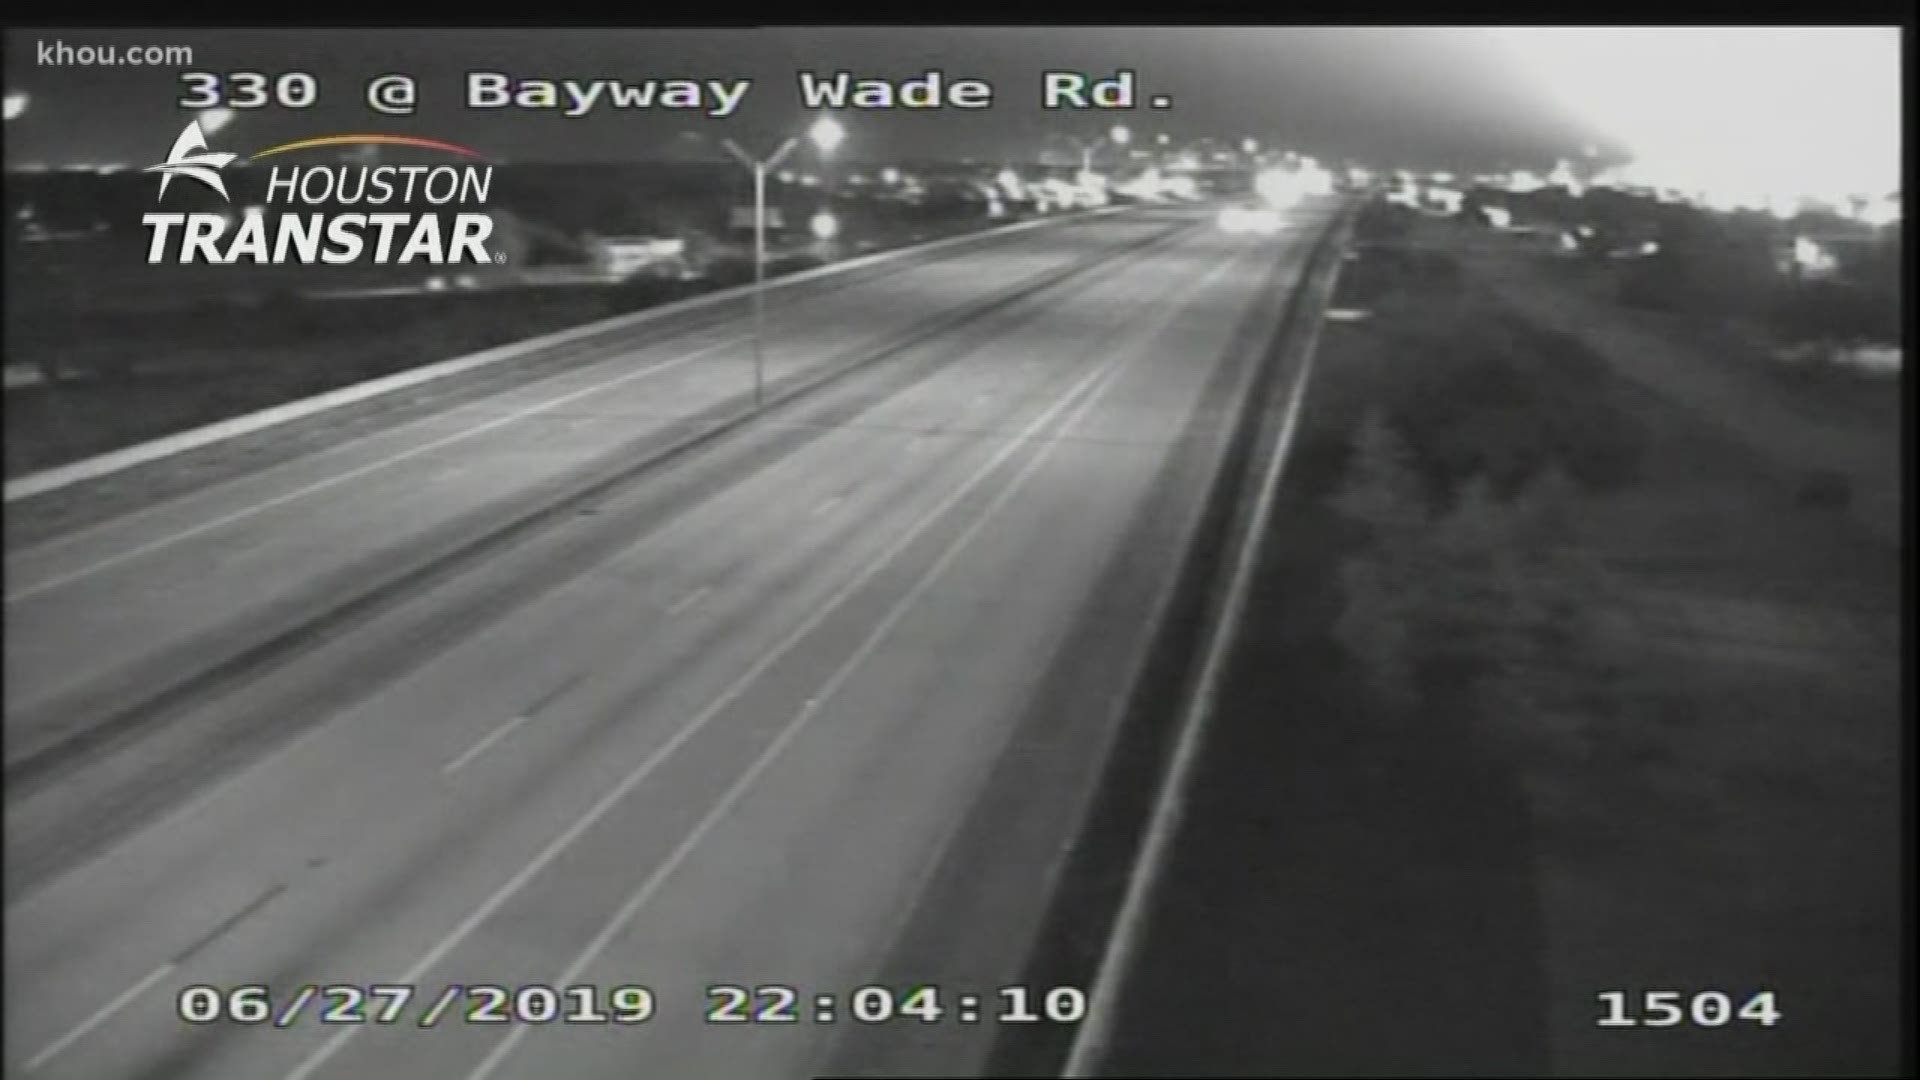 The Texas Department of Transportation has closed three westbound lanes on the Katy Freeway near Mason Road due to emergency repair. The HOV lane is also impacted. The lanes will be closed until 5 a.m. Friday, officials said.